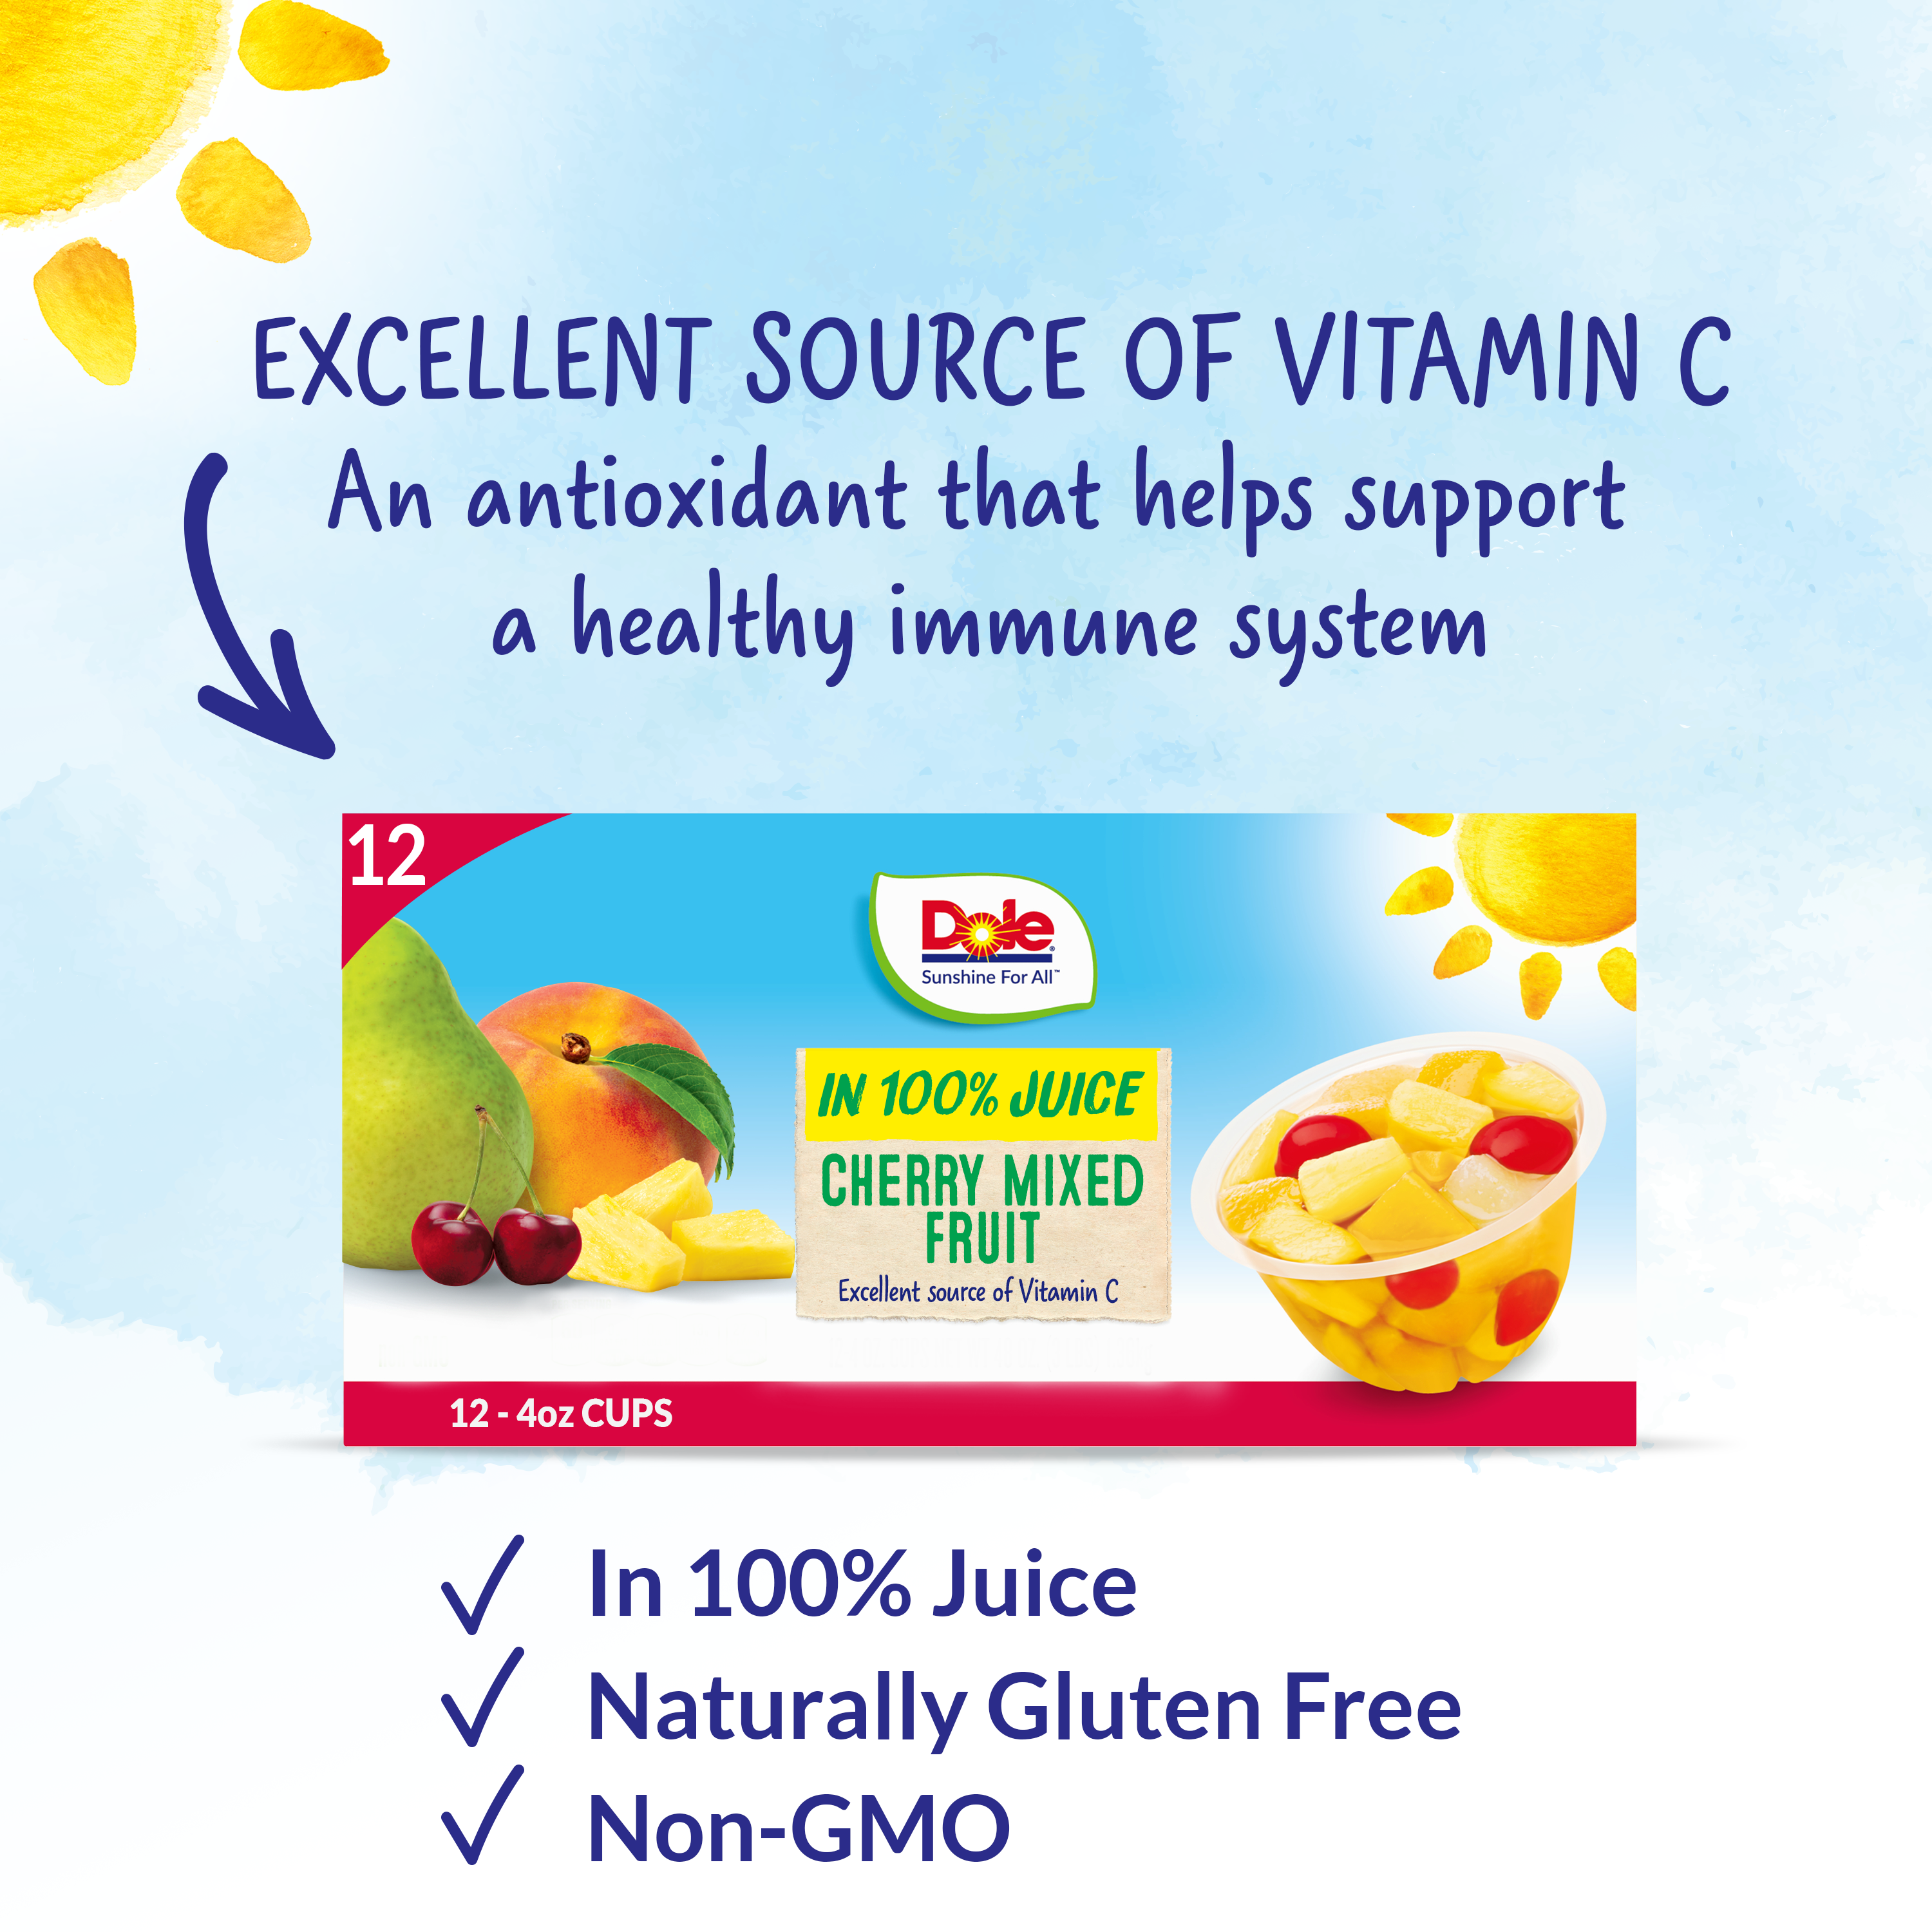 Dole Fruit Bowls Cherry Mixed Fruit in 100% Fruit Juice, 4 oz (12 Cups) - image 3 of 10